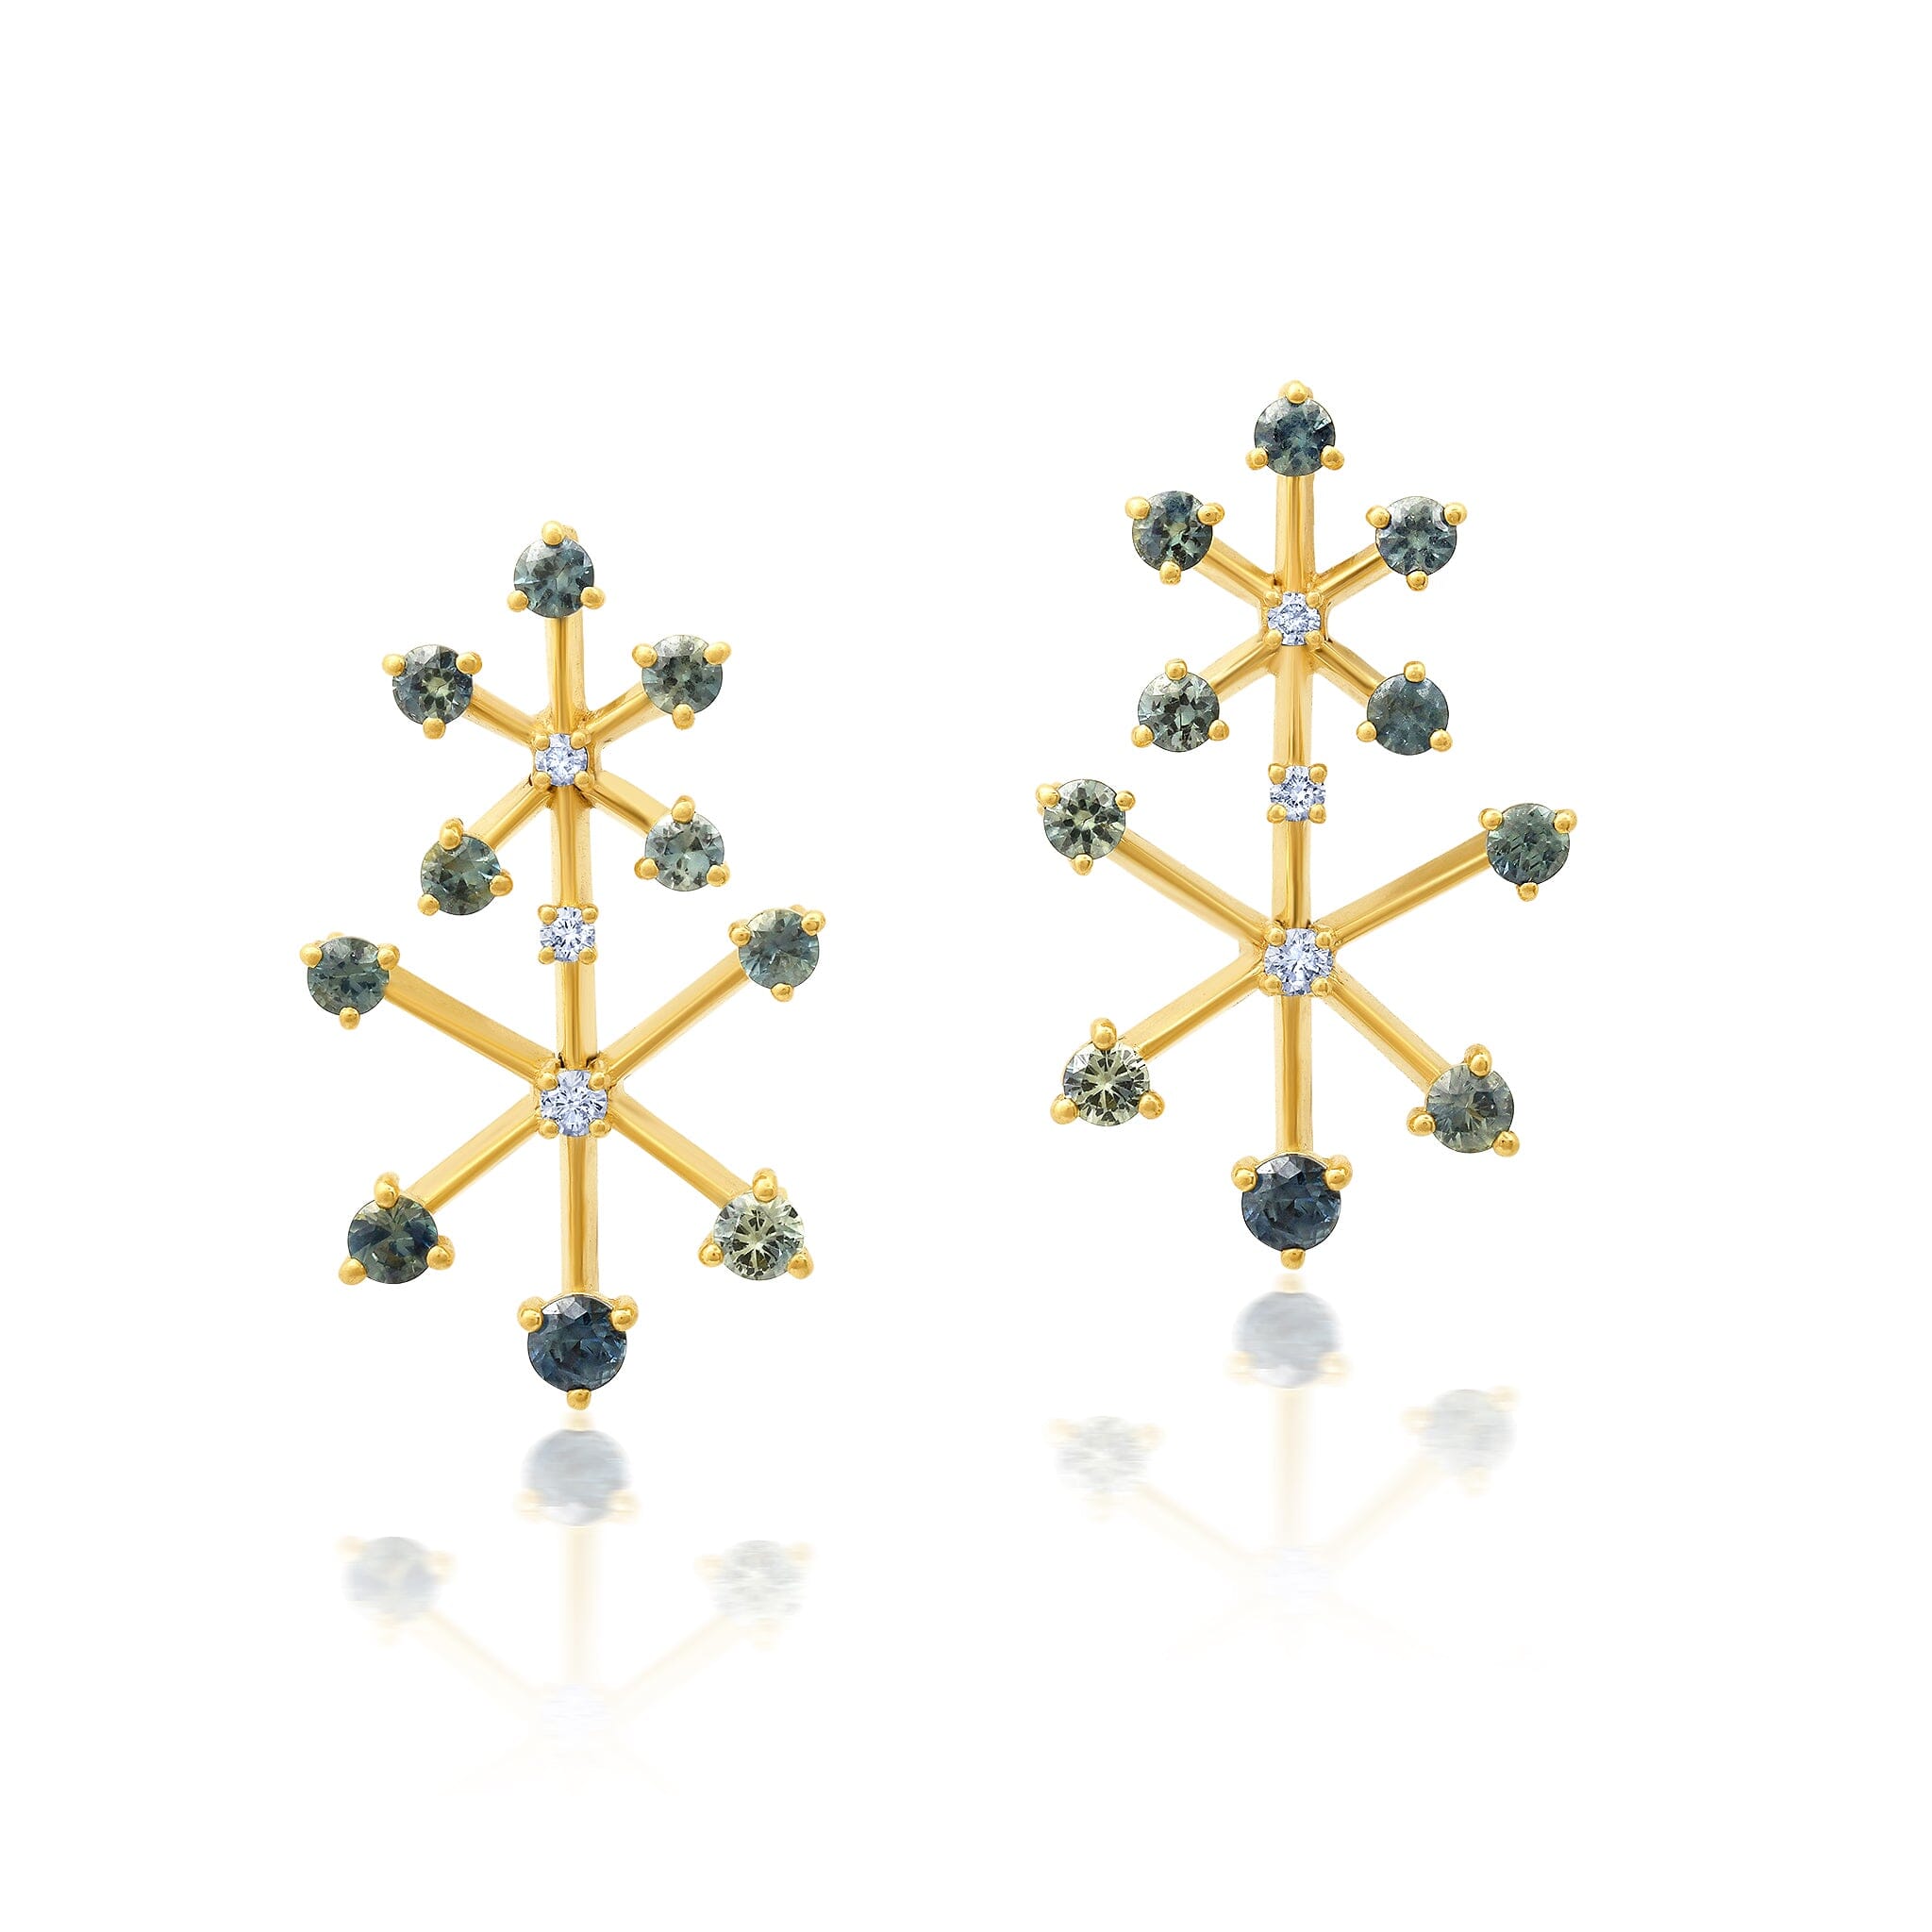 NEW BWLV_E1060 Sapphire + Diamond Chandelier Earrings Jewelry Bayou with Love 